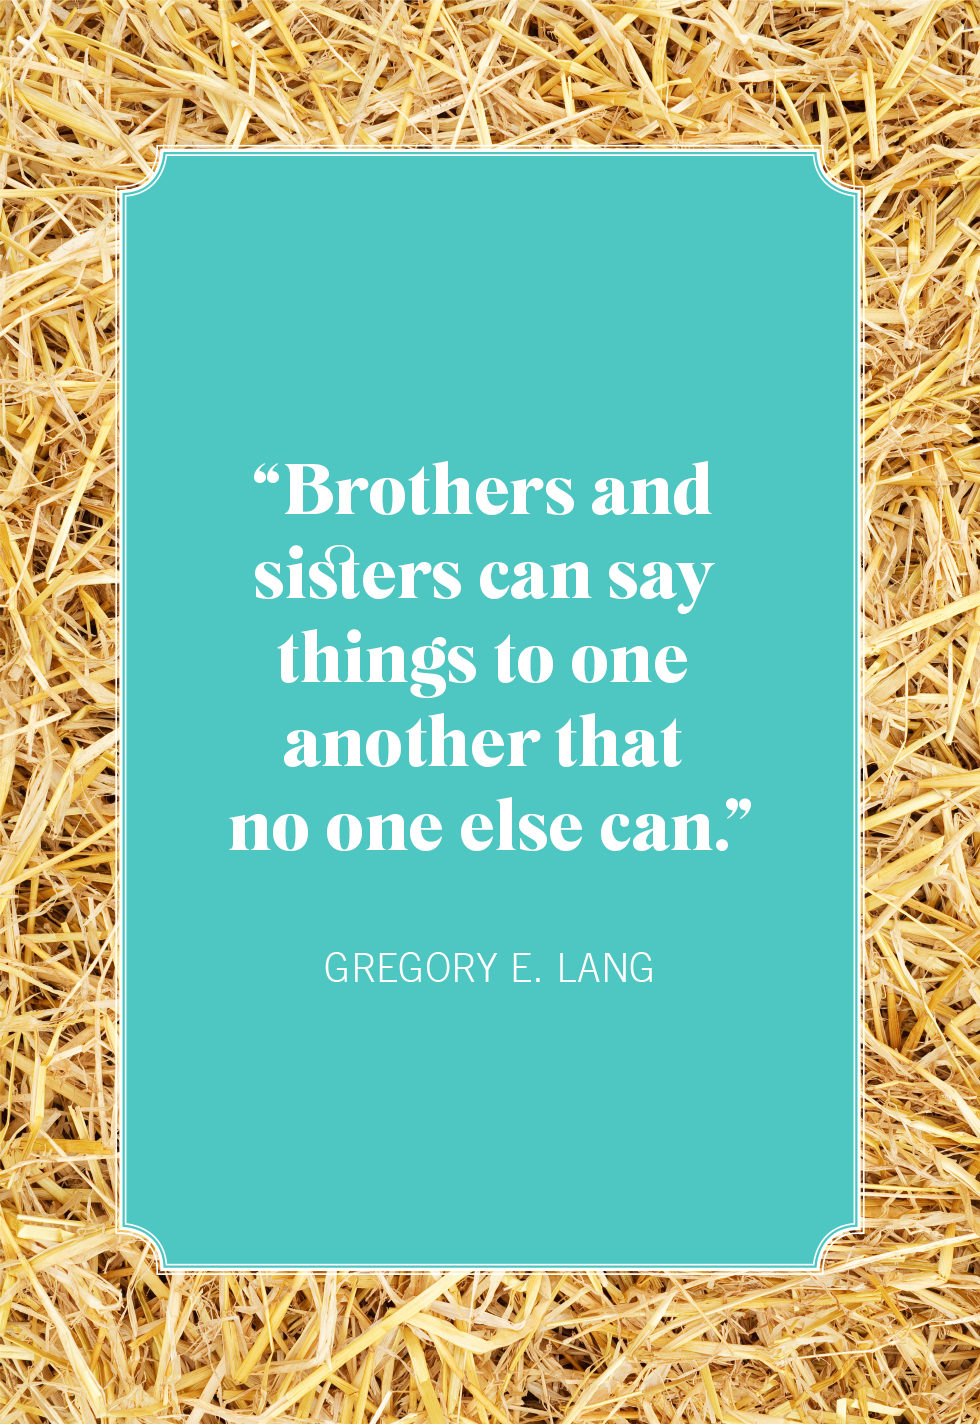 200 Brother And Sister Quotes To Celebrate Your Sibling Bond | Sister quotes,  Brother quotes, Sisters quotes